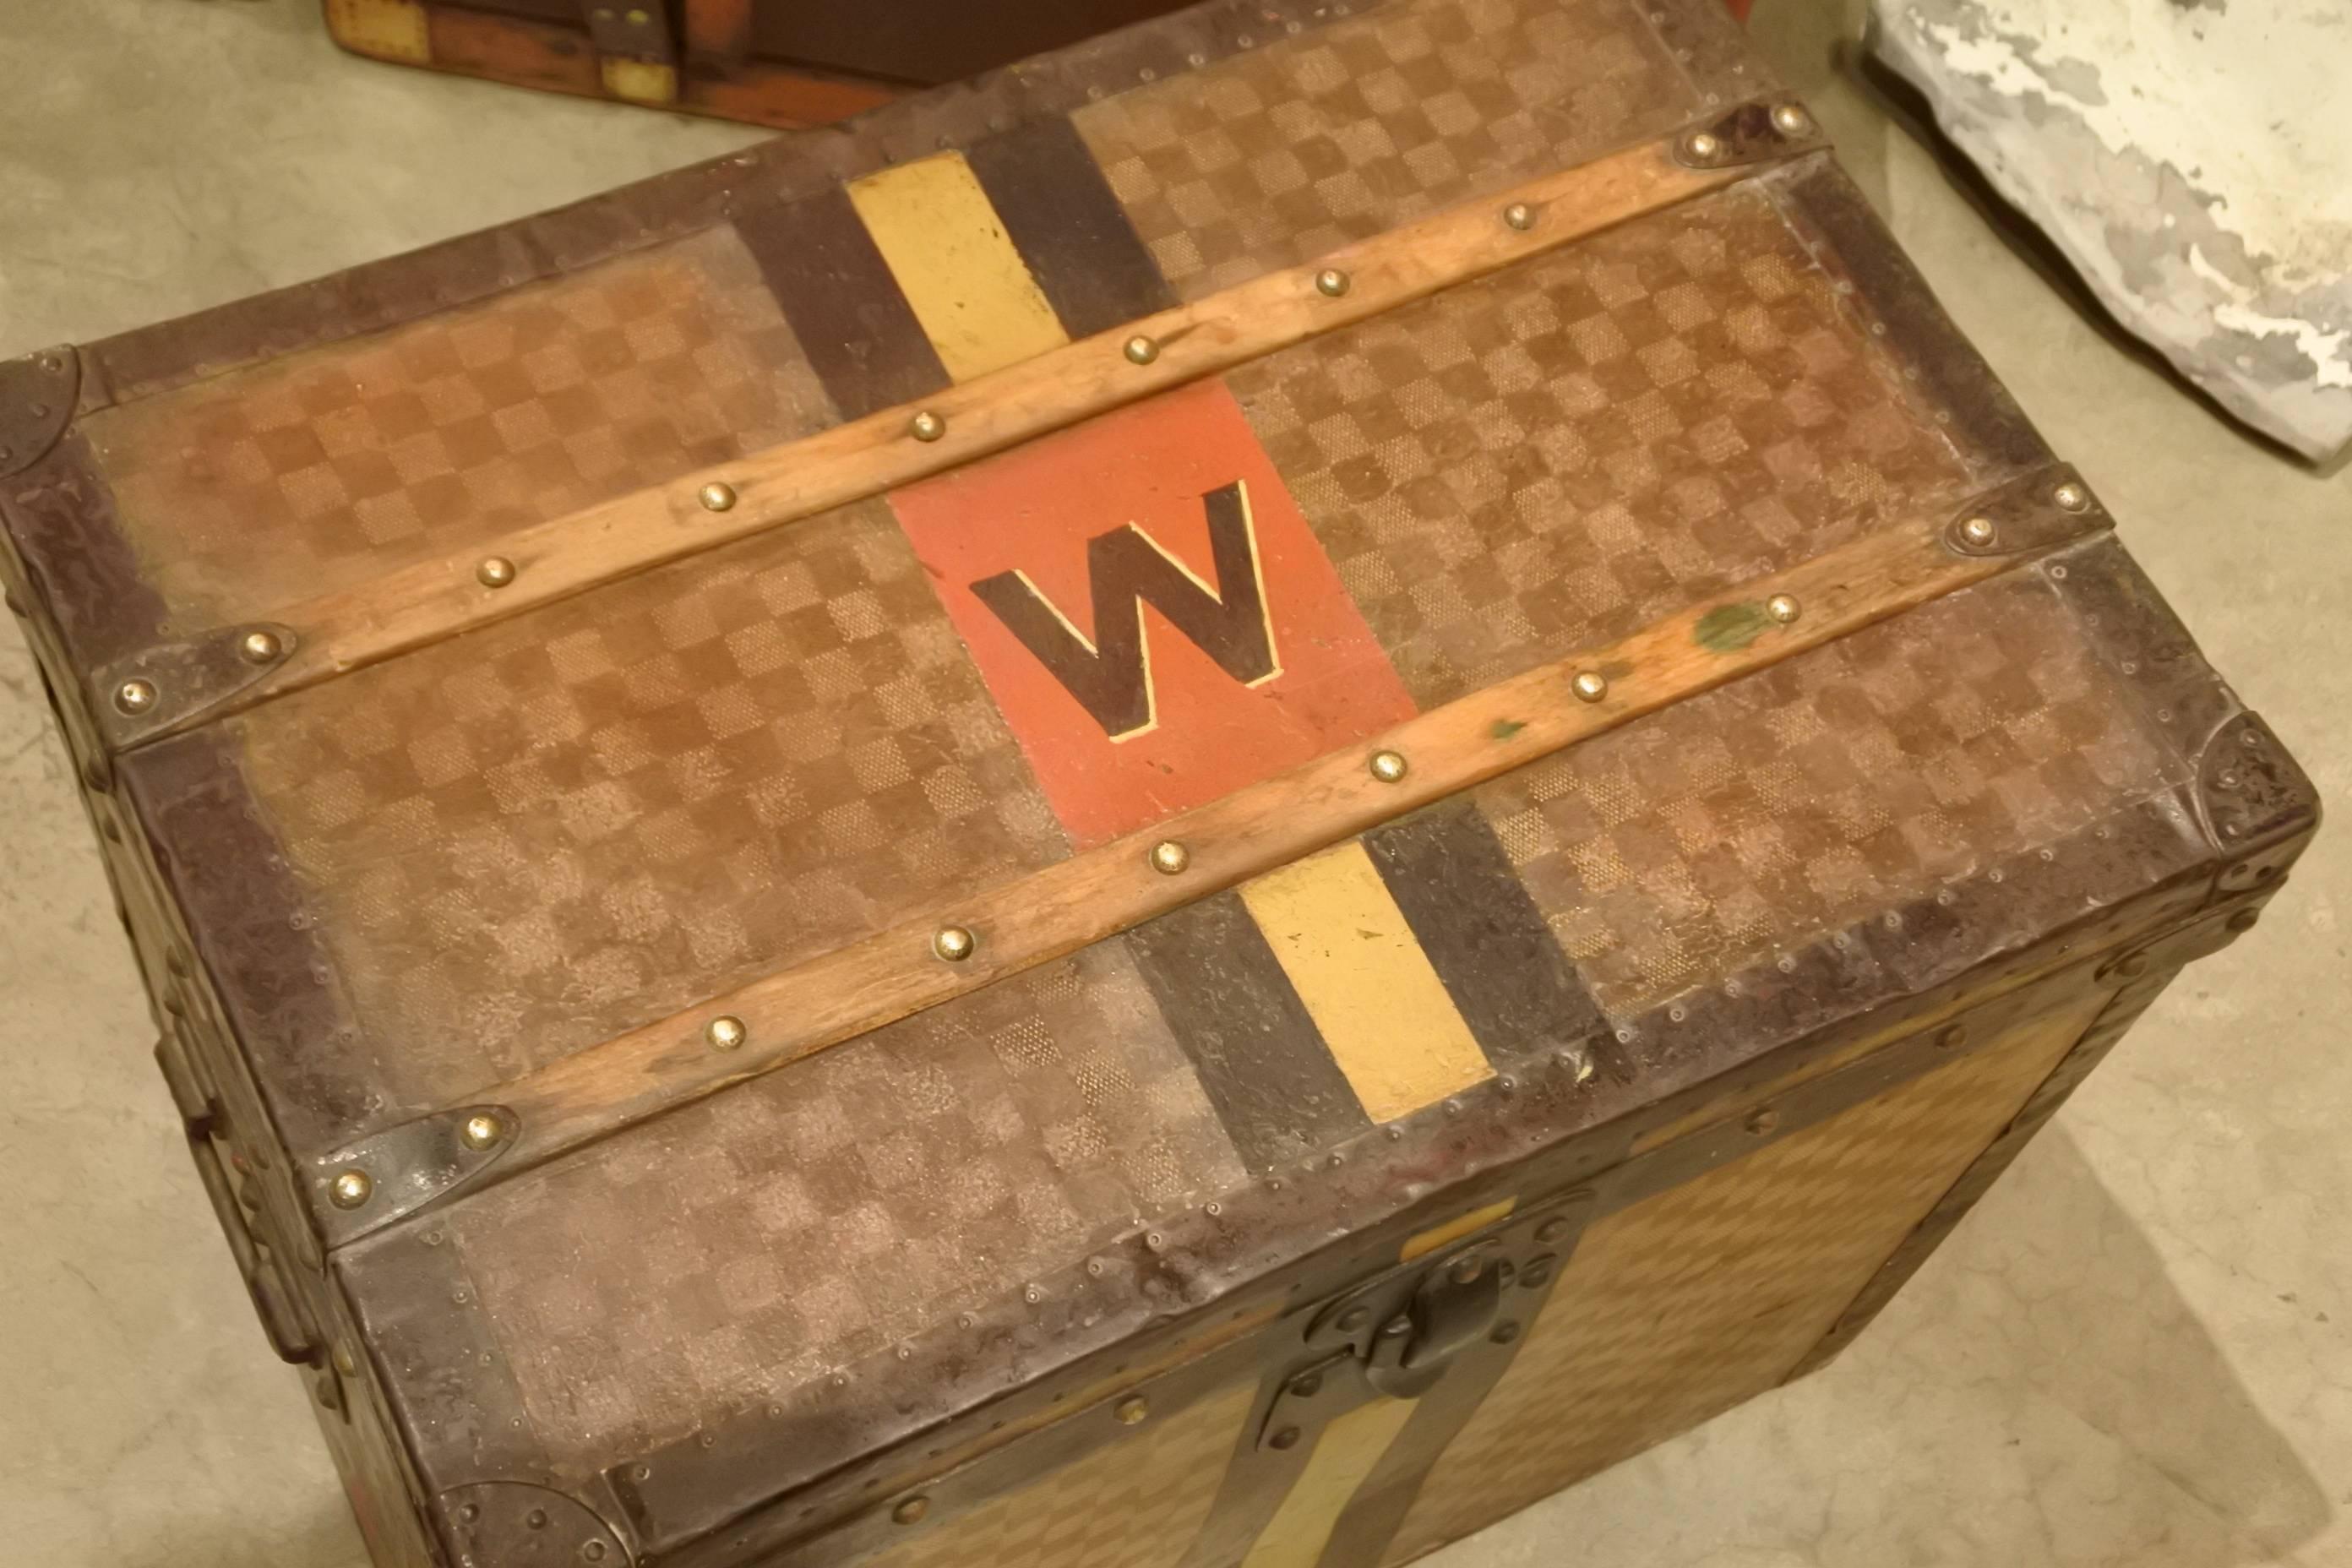 Rare Louis Vuitton Damier trunk with original monogram and striping. Perfect size for a side or end table. These trunks bear the character and craftsmanship of traveling with style in the old-world.